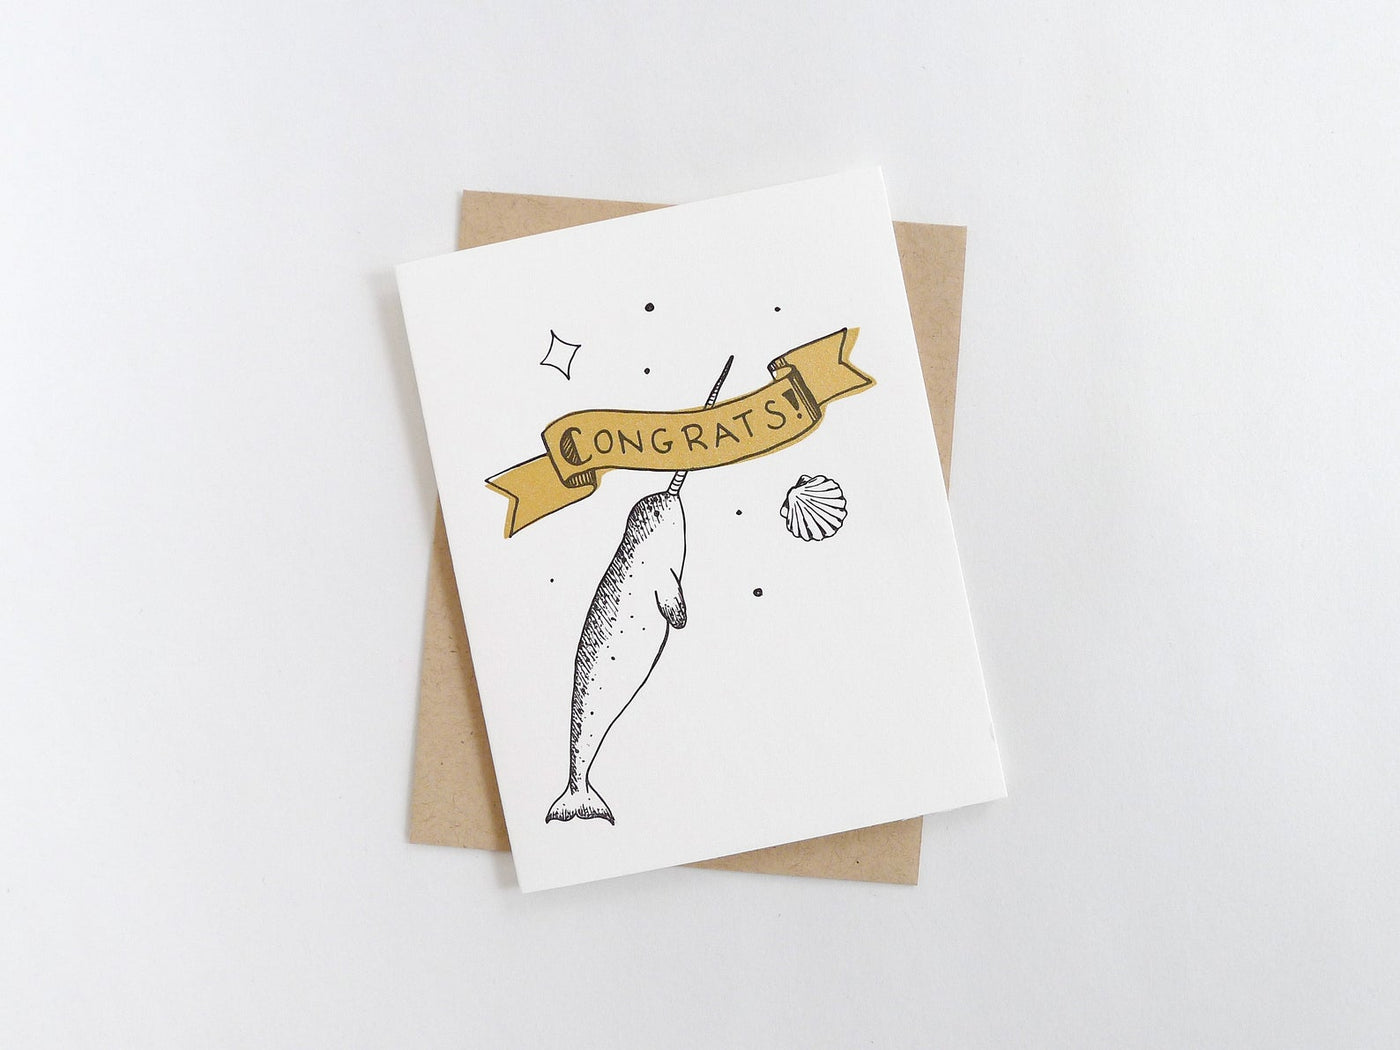 Congrats Narwhal Card